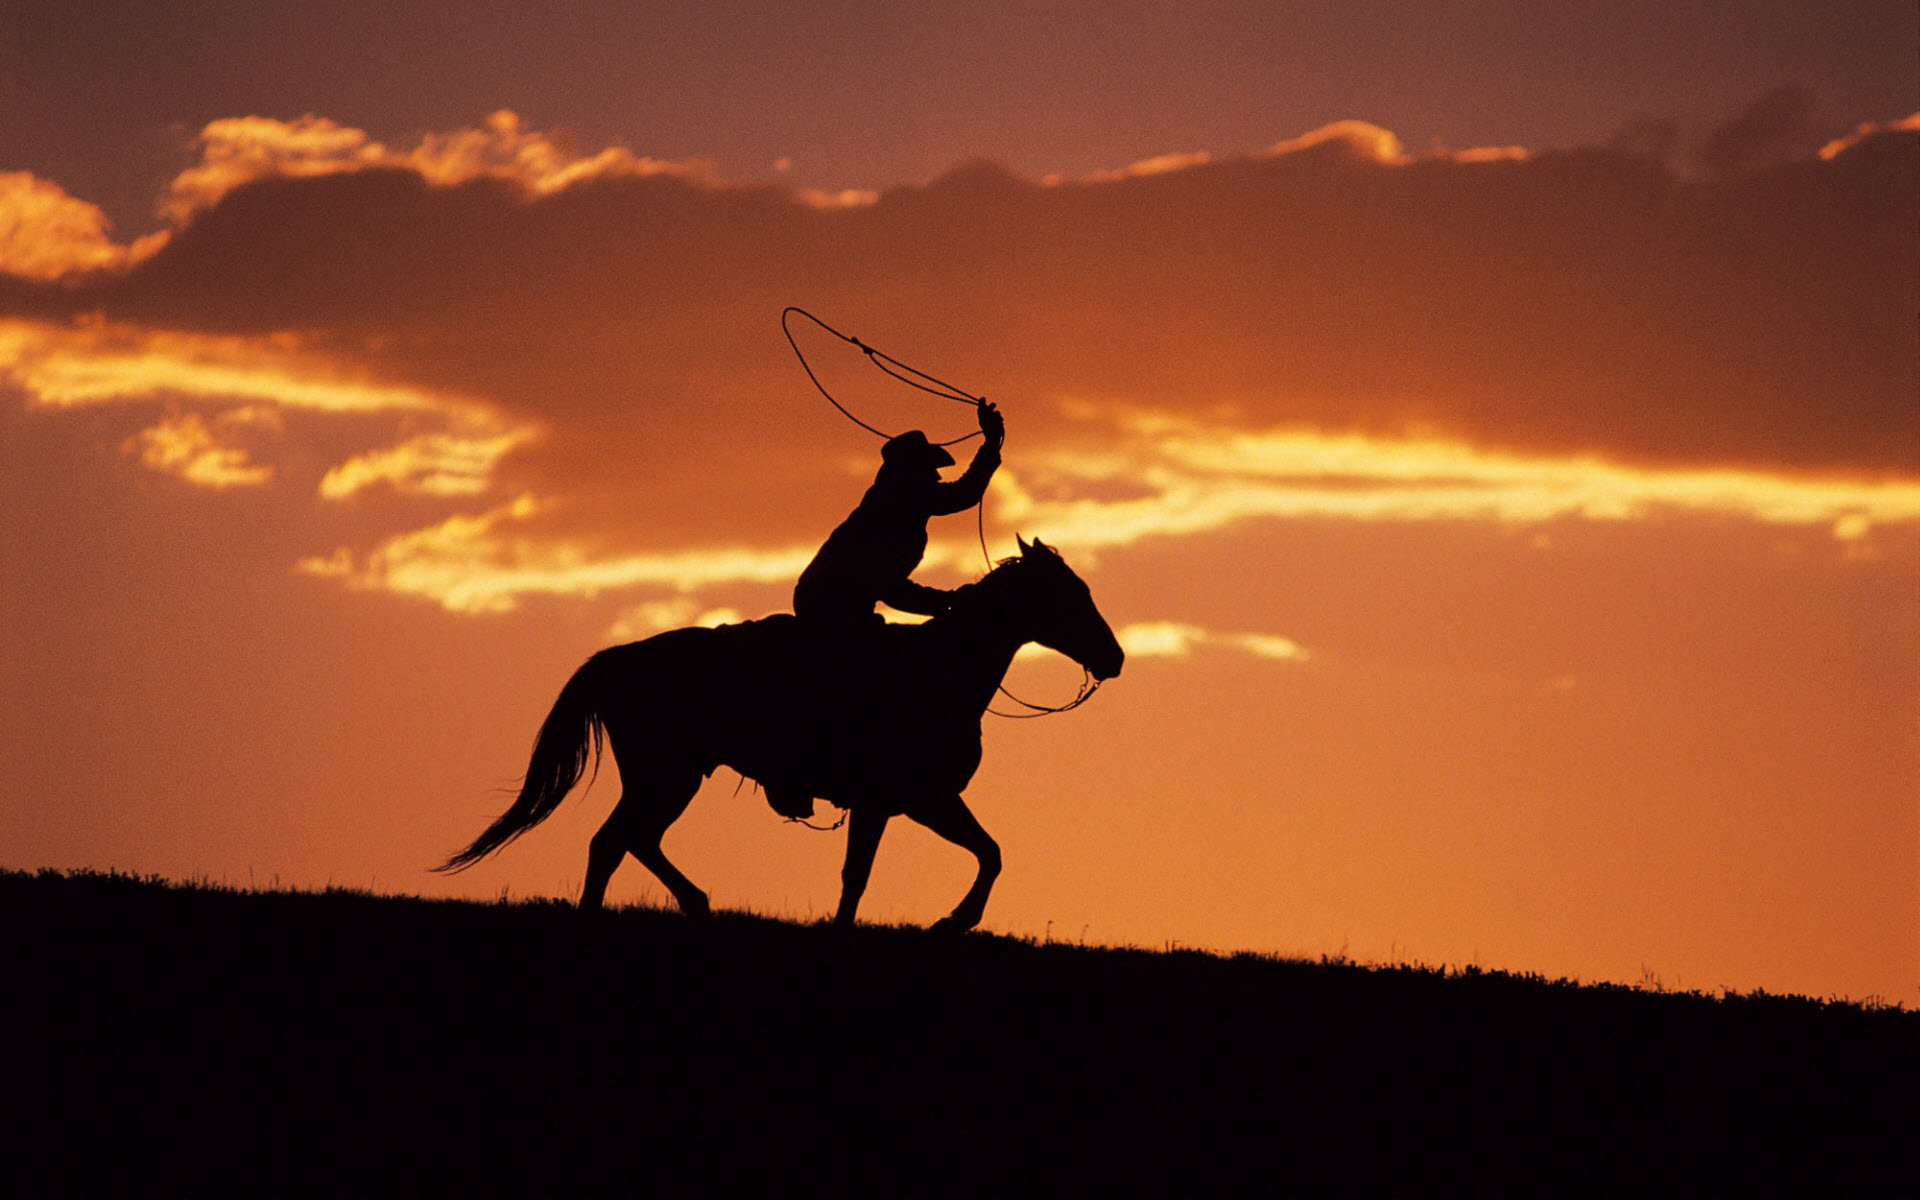 Scenery Wallpaper Includes A Western Cowboy At Sunset In